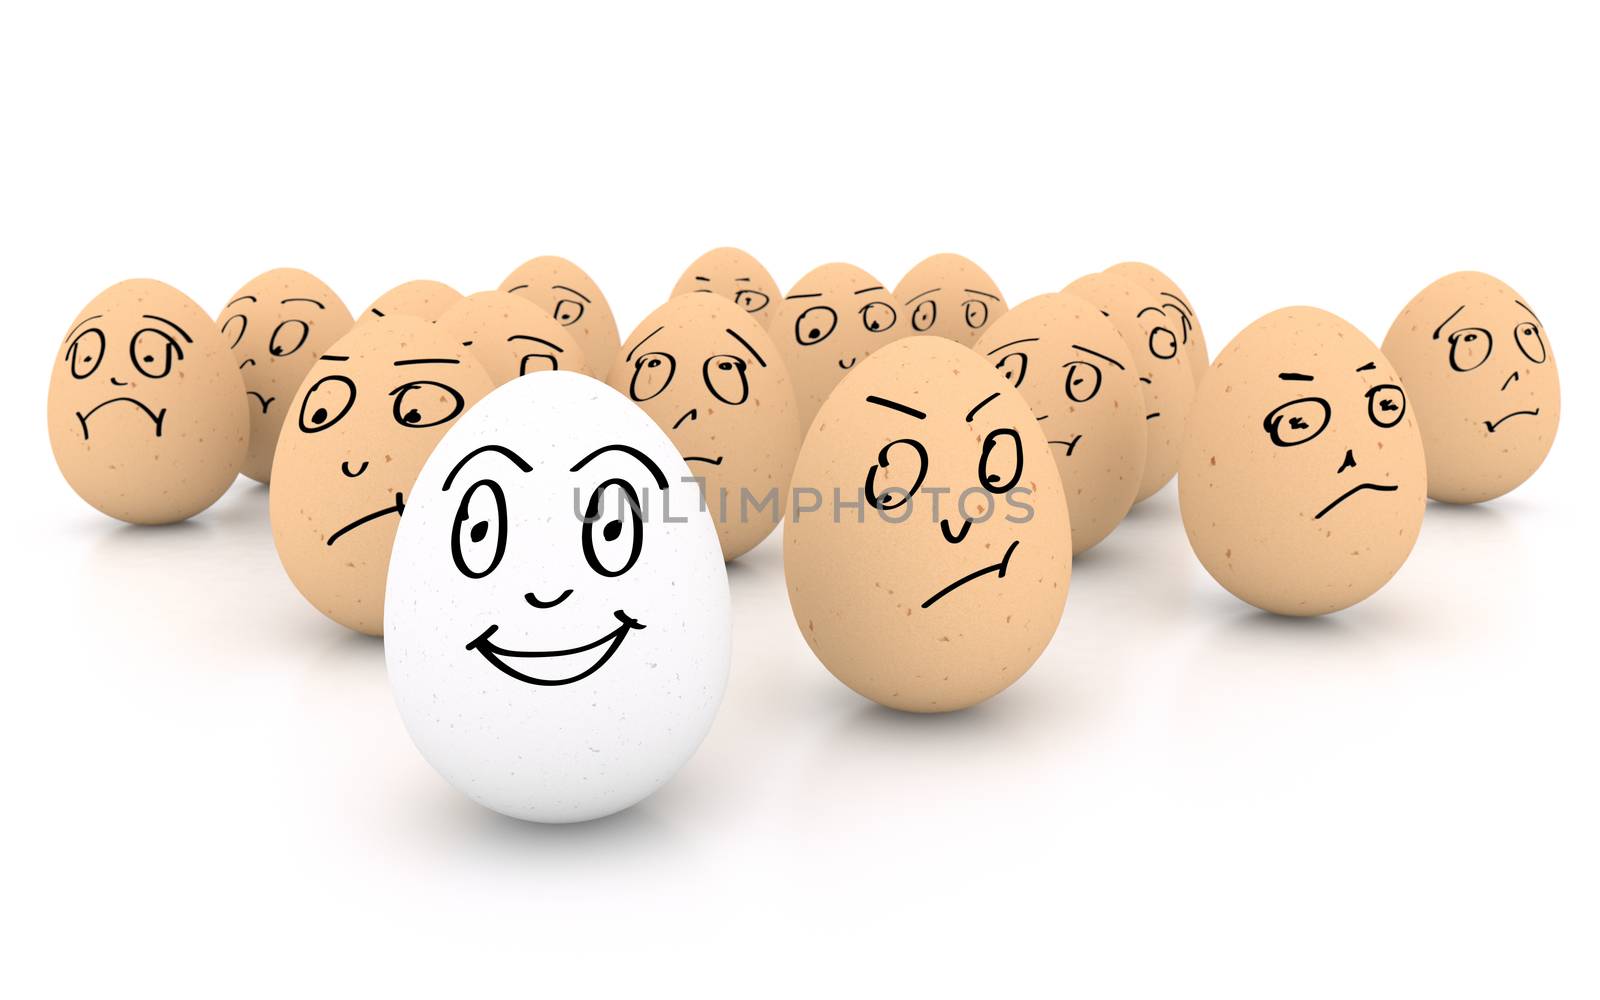 One happy smiling egg amongst sad, angry and envious crowd of eggs isolated on white background